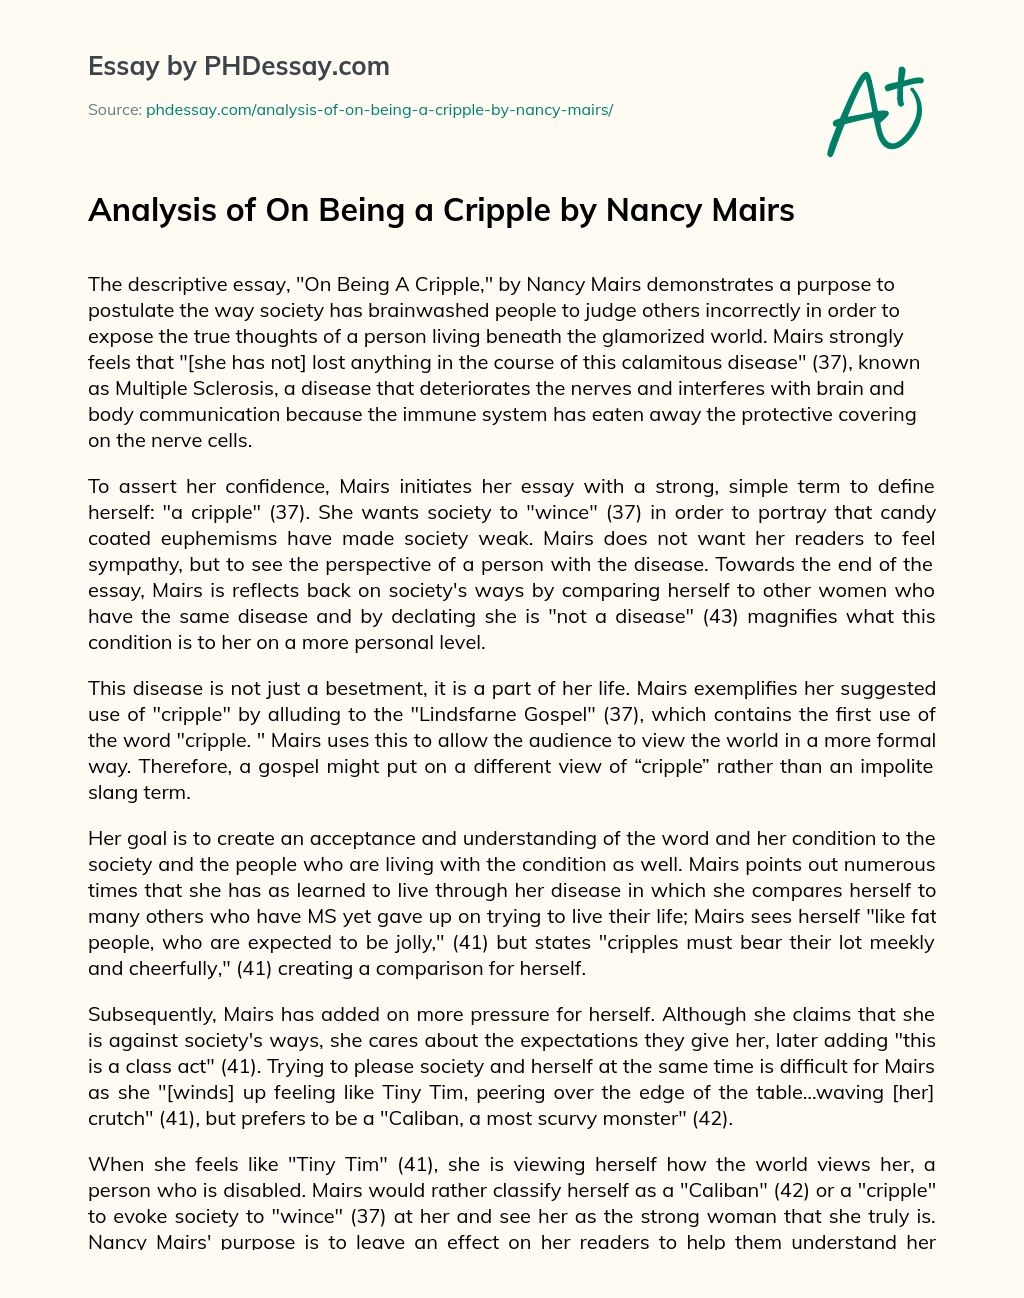 Analysis of On Being a Cripple by Nancy Mairs essay